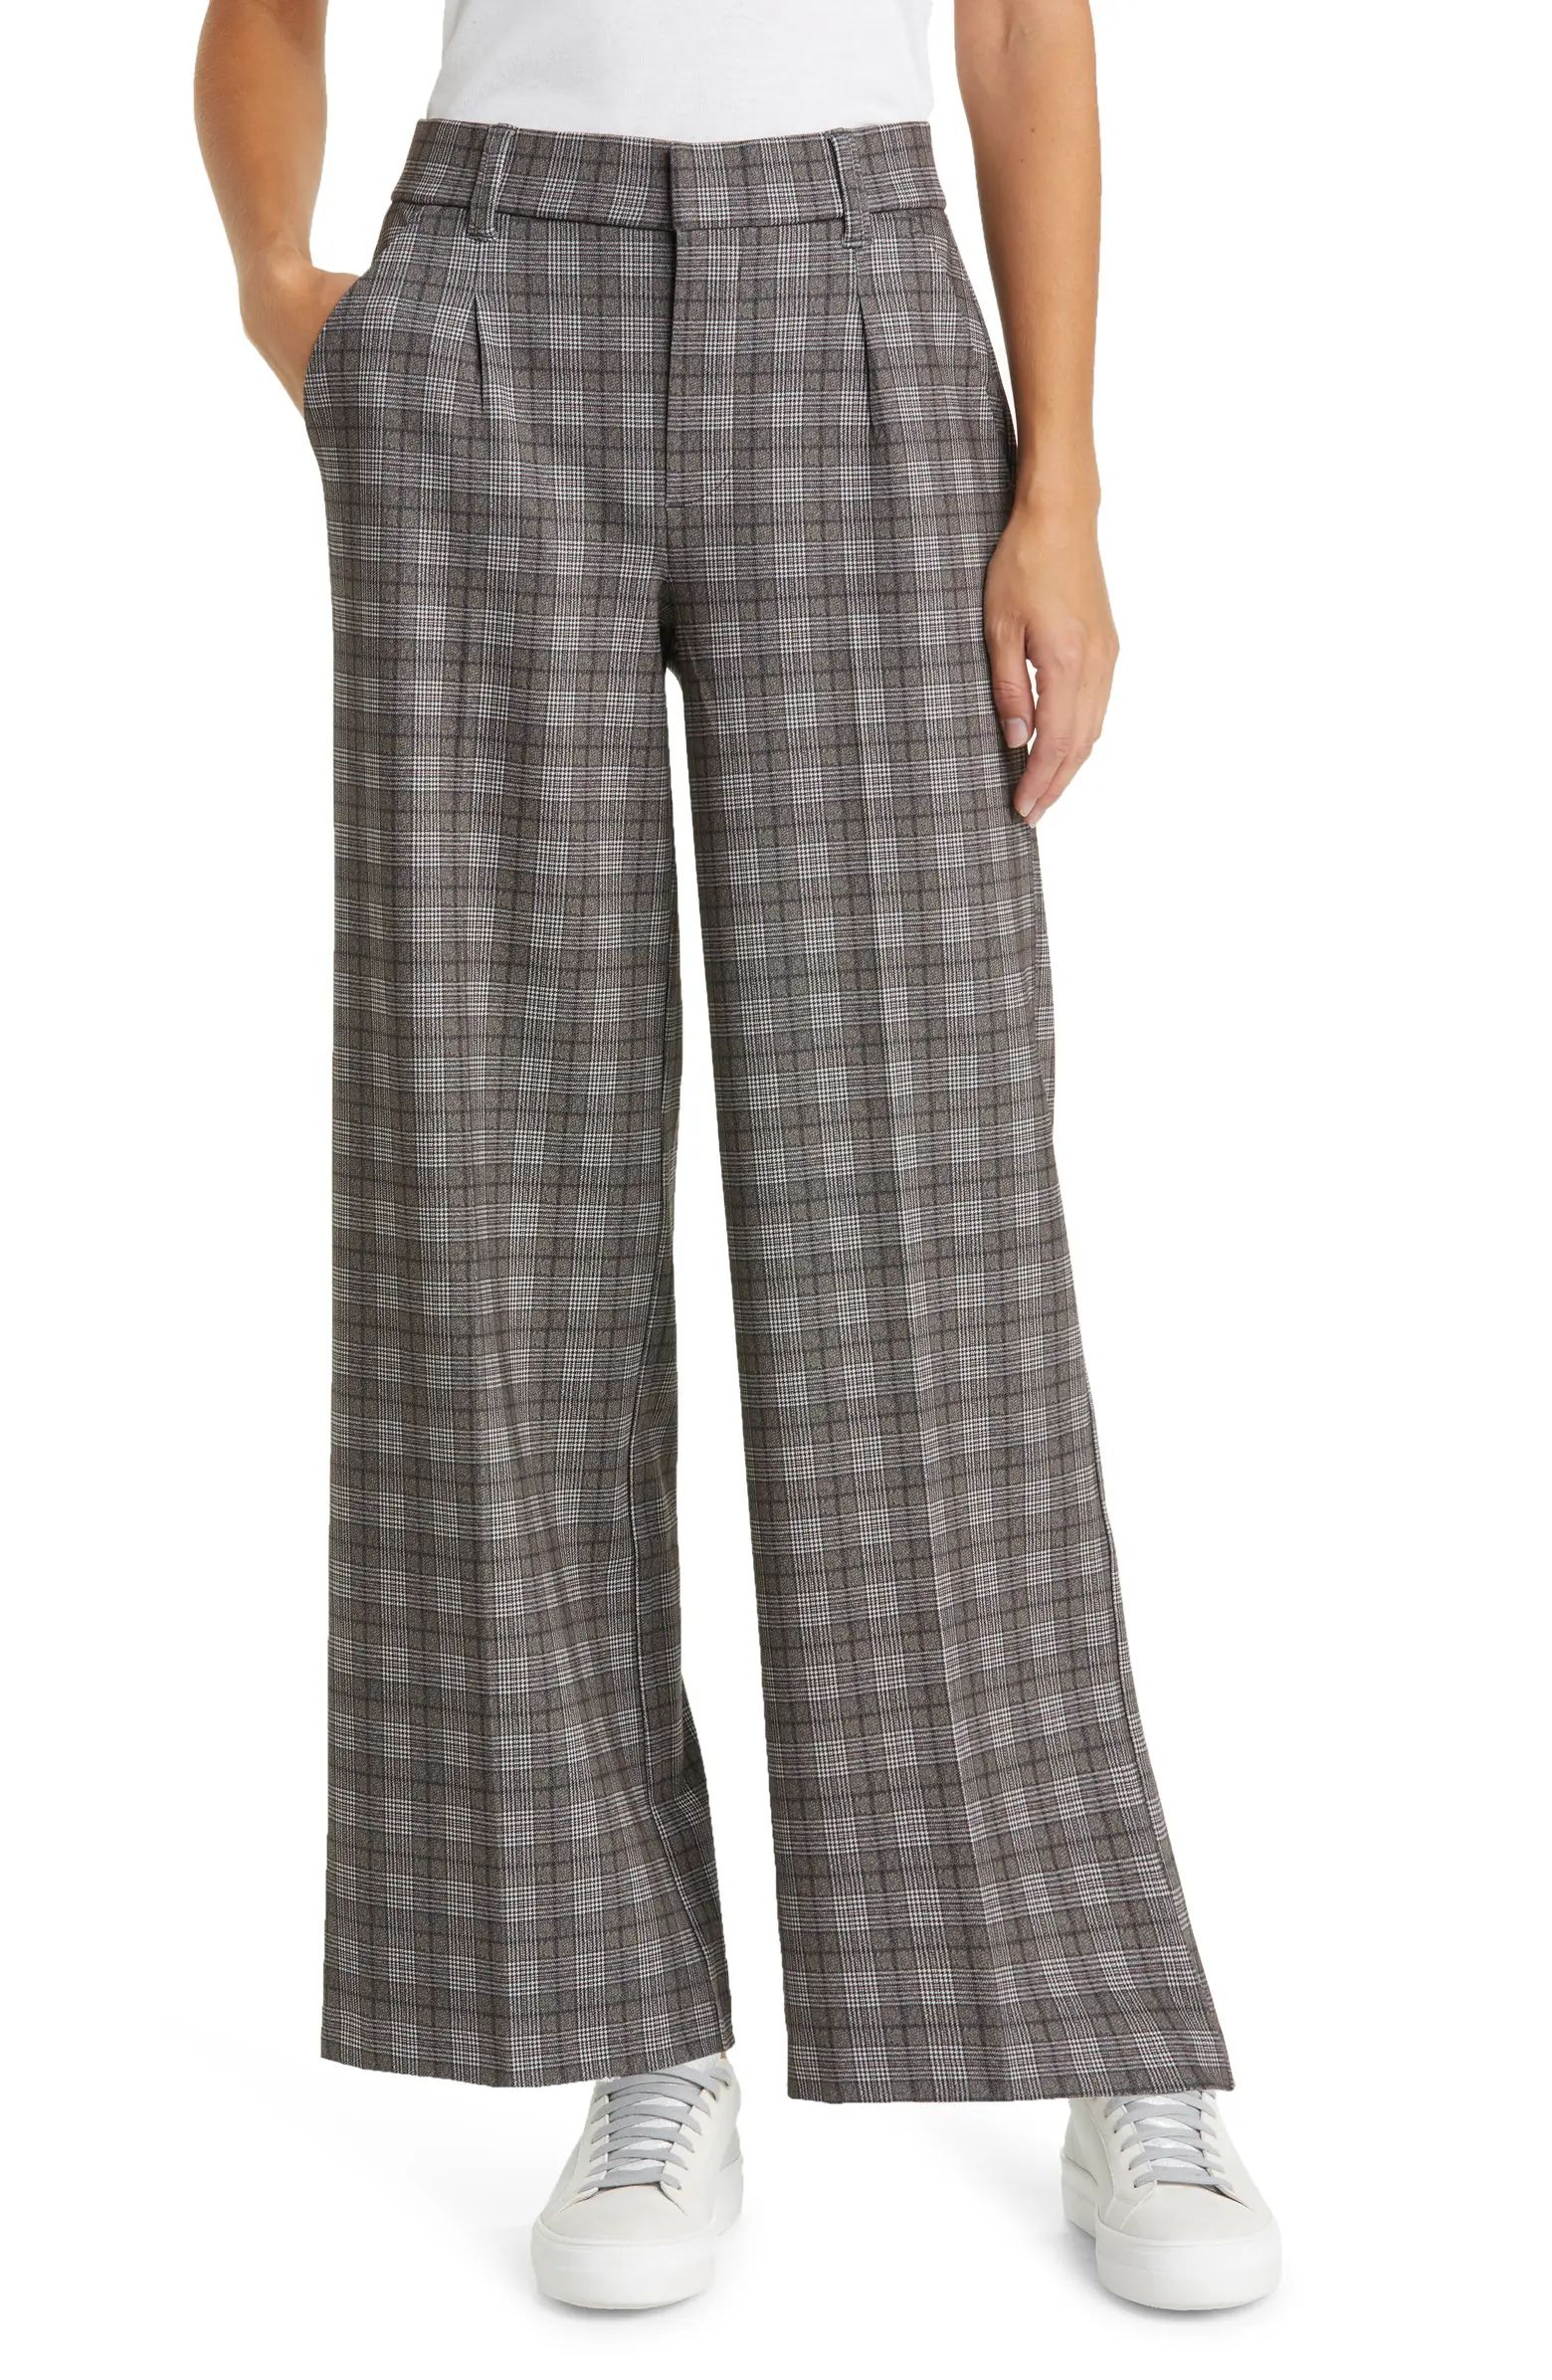 Wit & Wisdom 'Ab'Solution Skyrise Plaid Pleated Wide Leg Trousers | Nordstrom | Nordstrom